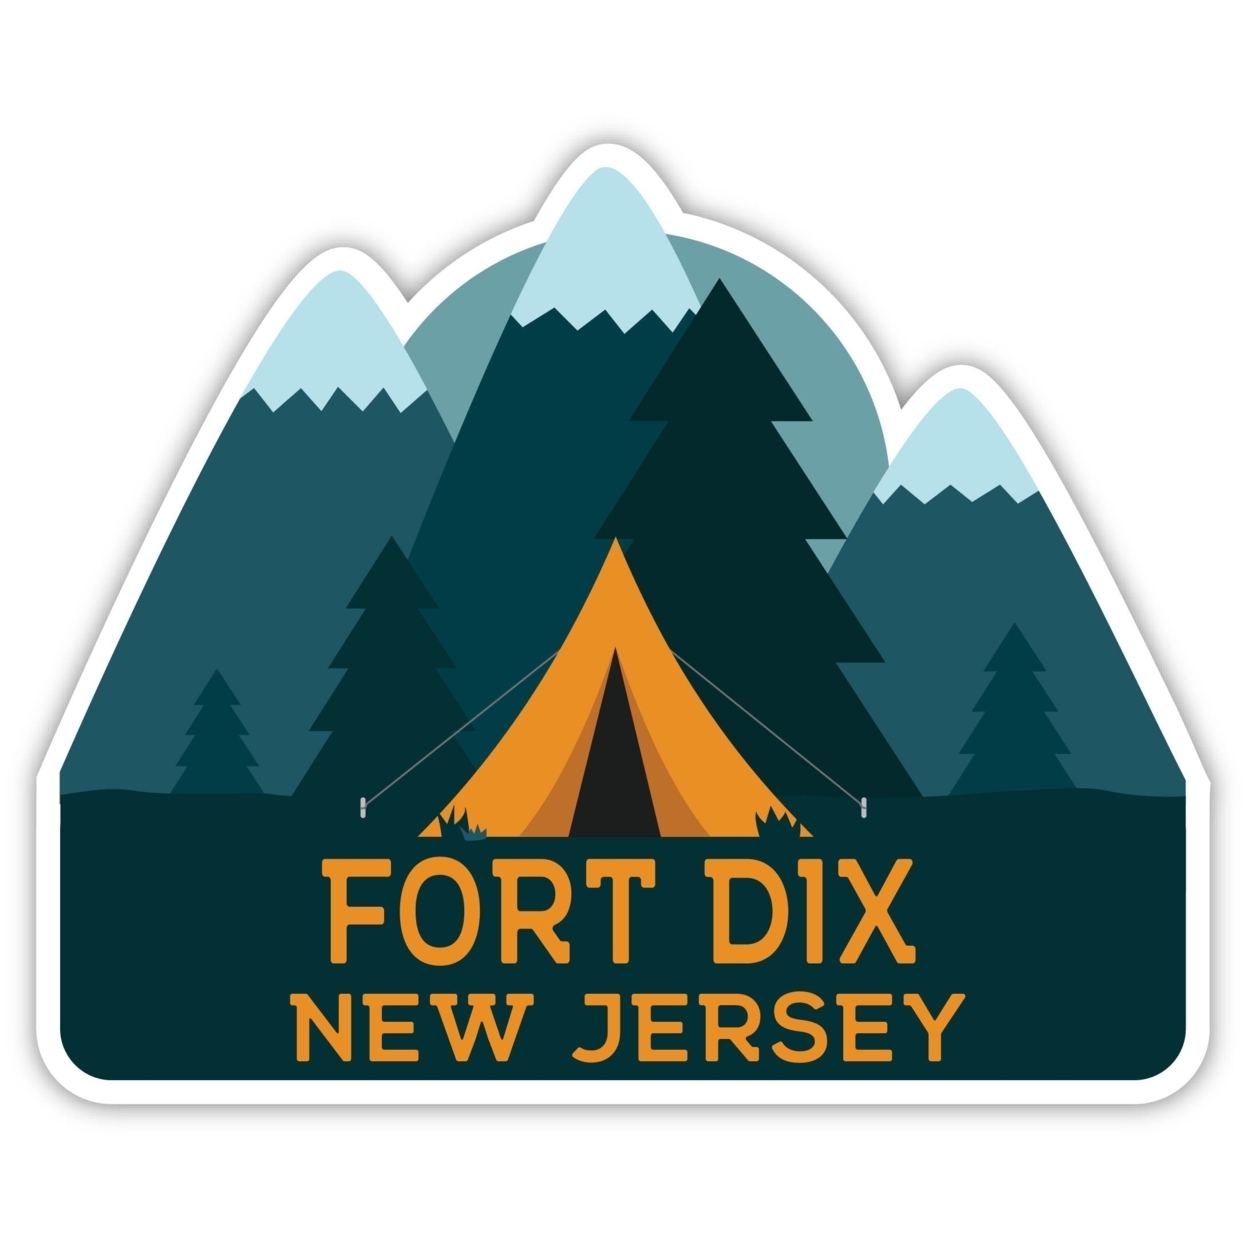 Fort Dix New Jersey Souvenir Decorative Stickers (Choose Theme And Size) - 4-Pack, 10-Inch, Tent